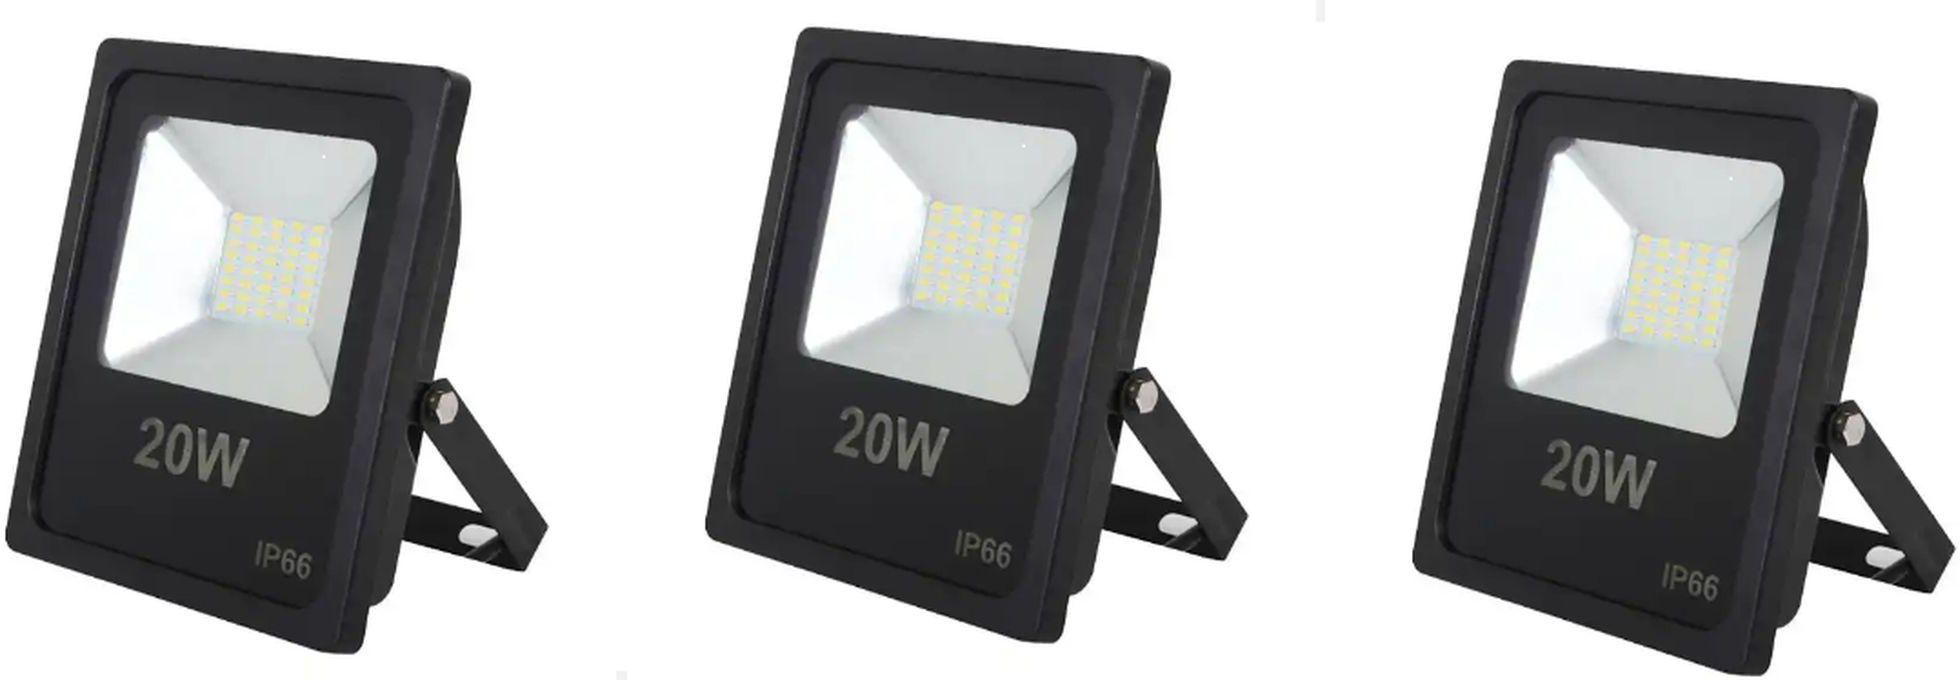 3 LED Floodlight 20 Watts. Yelow Lighting For Outdoor Use